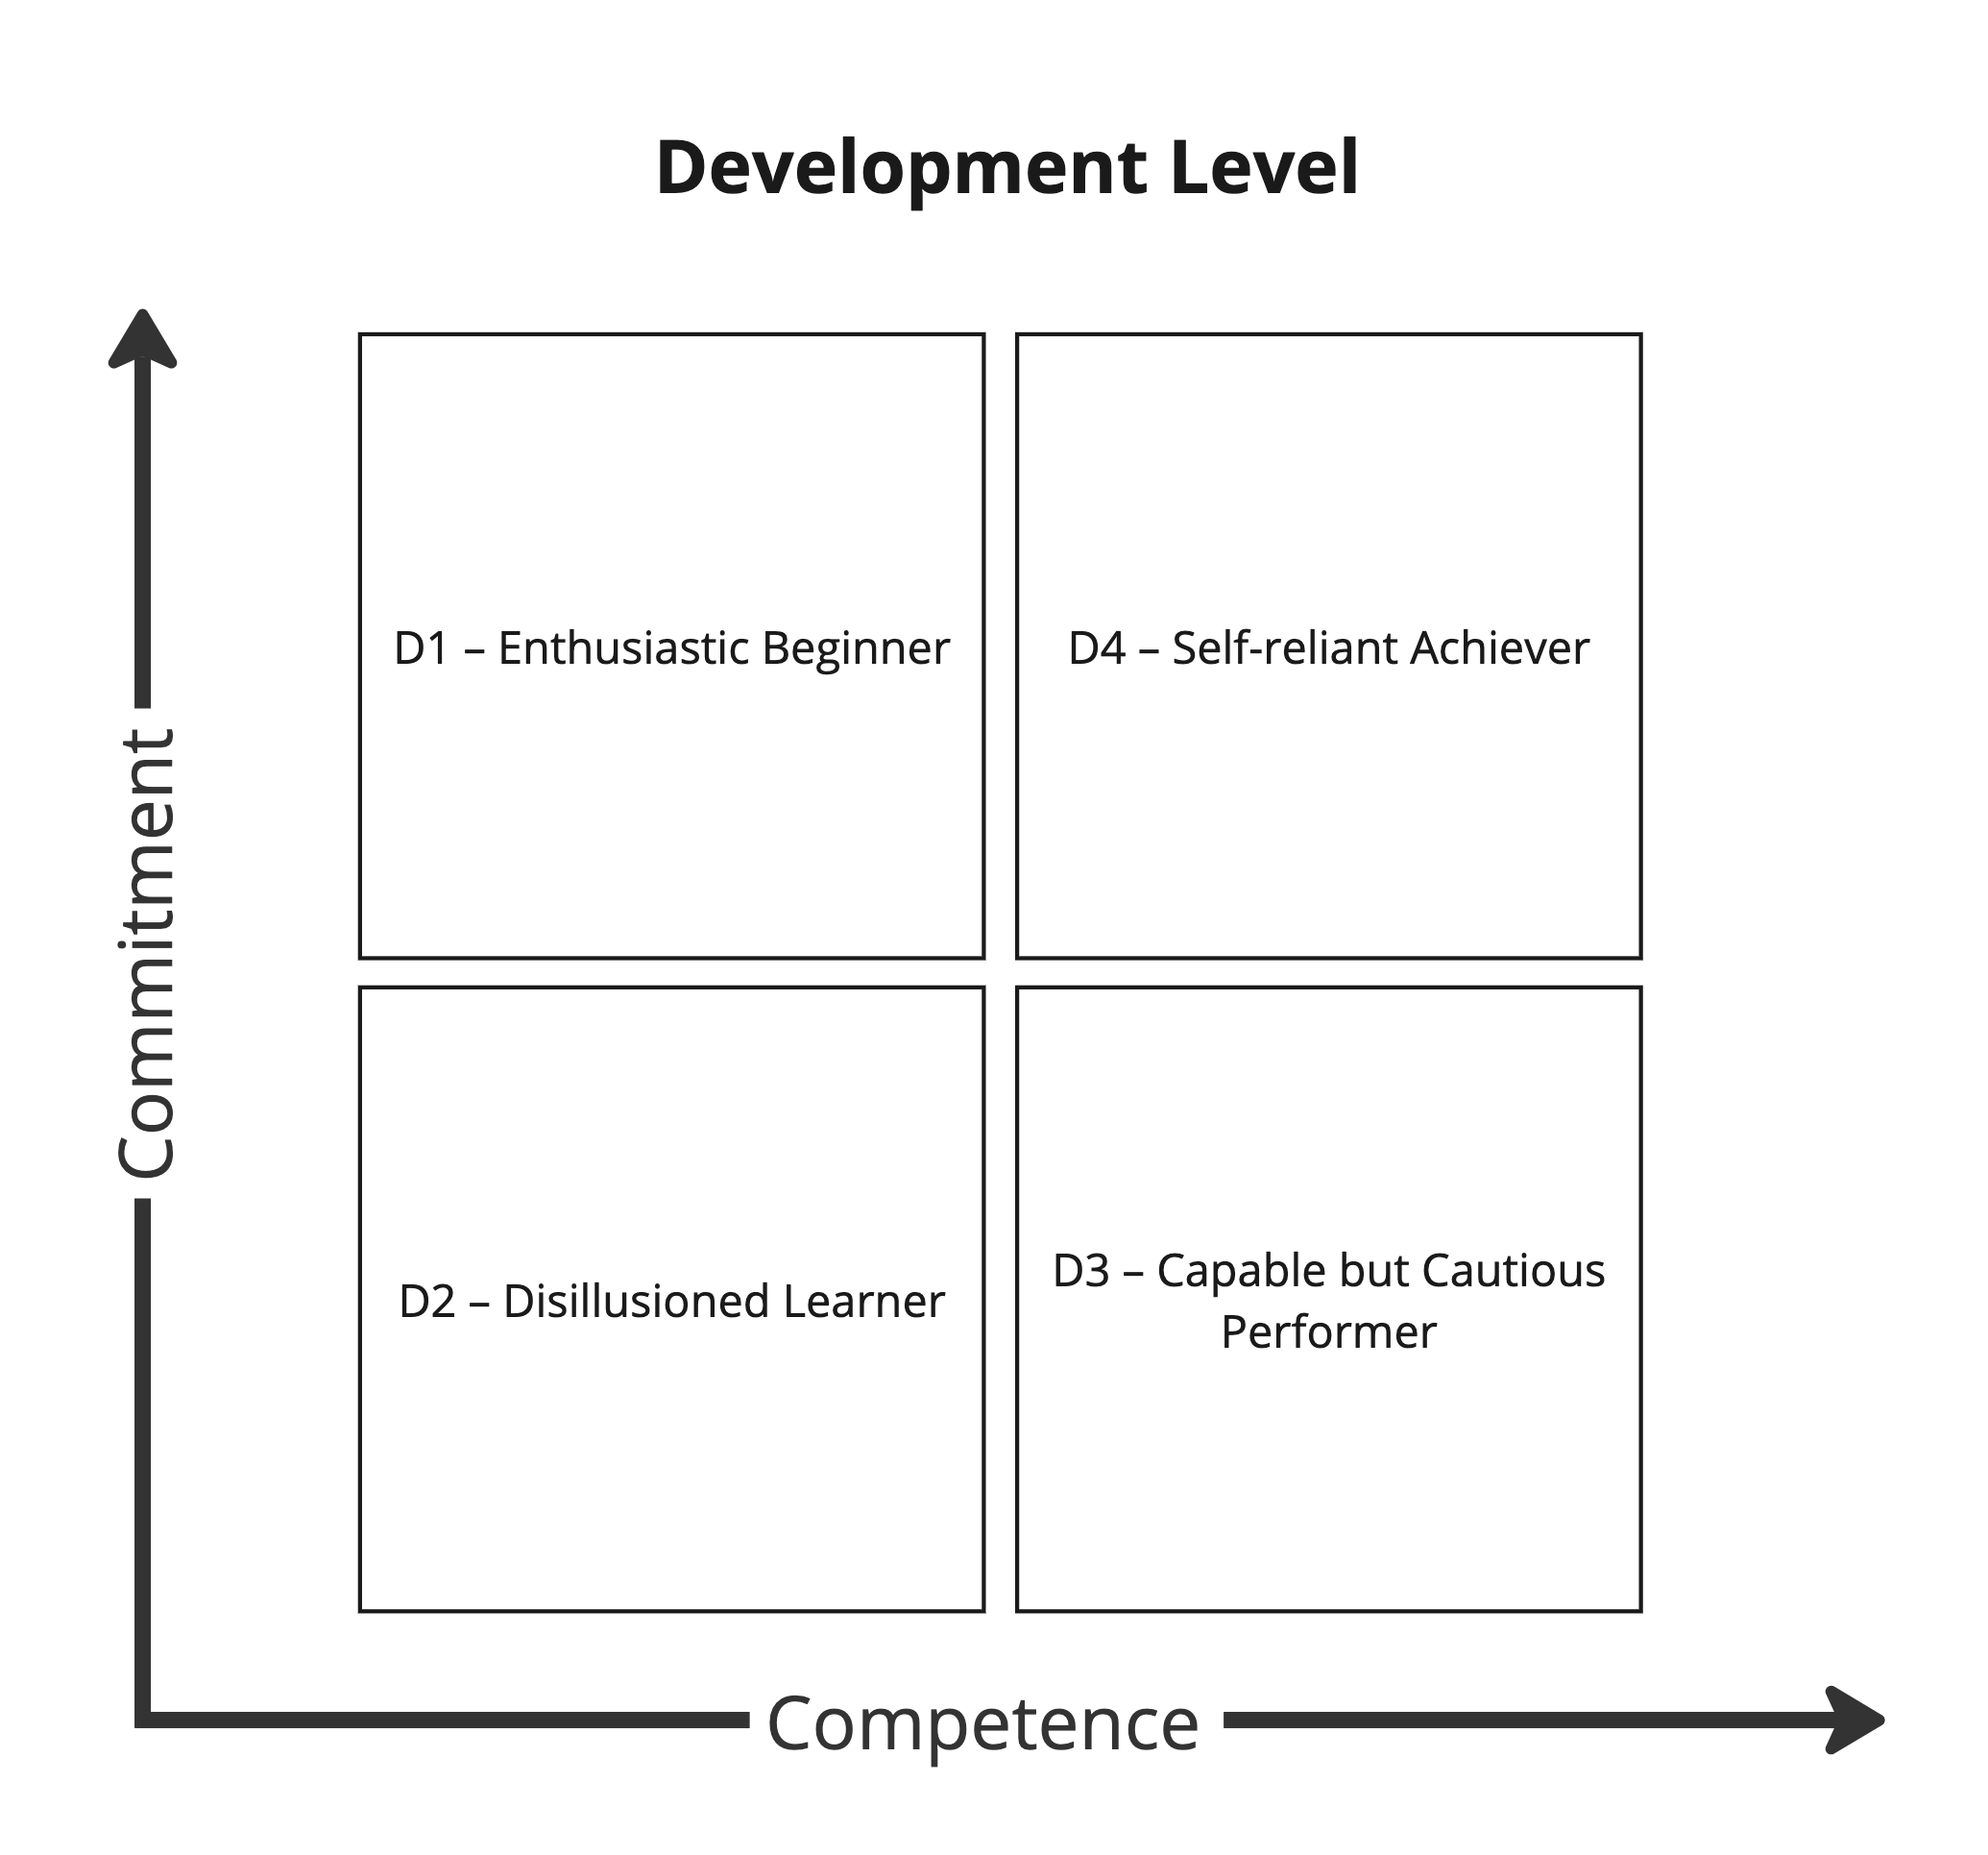 D1 - Enthusiastic Beginner, D2 - Disillusioned Learner, D3 - Capable but Cautious Performer, D4 - Self-reliant Achiever